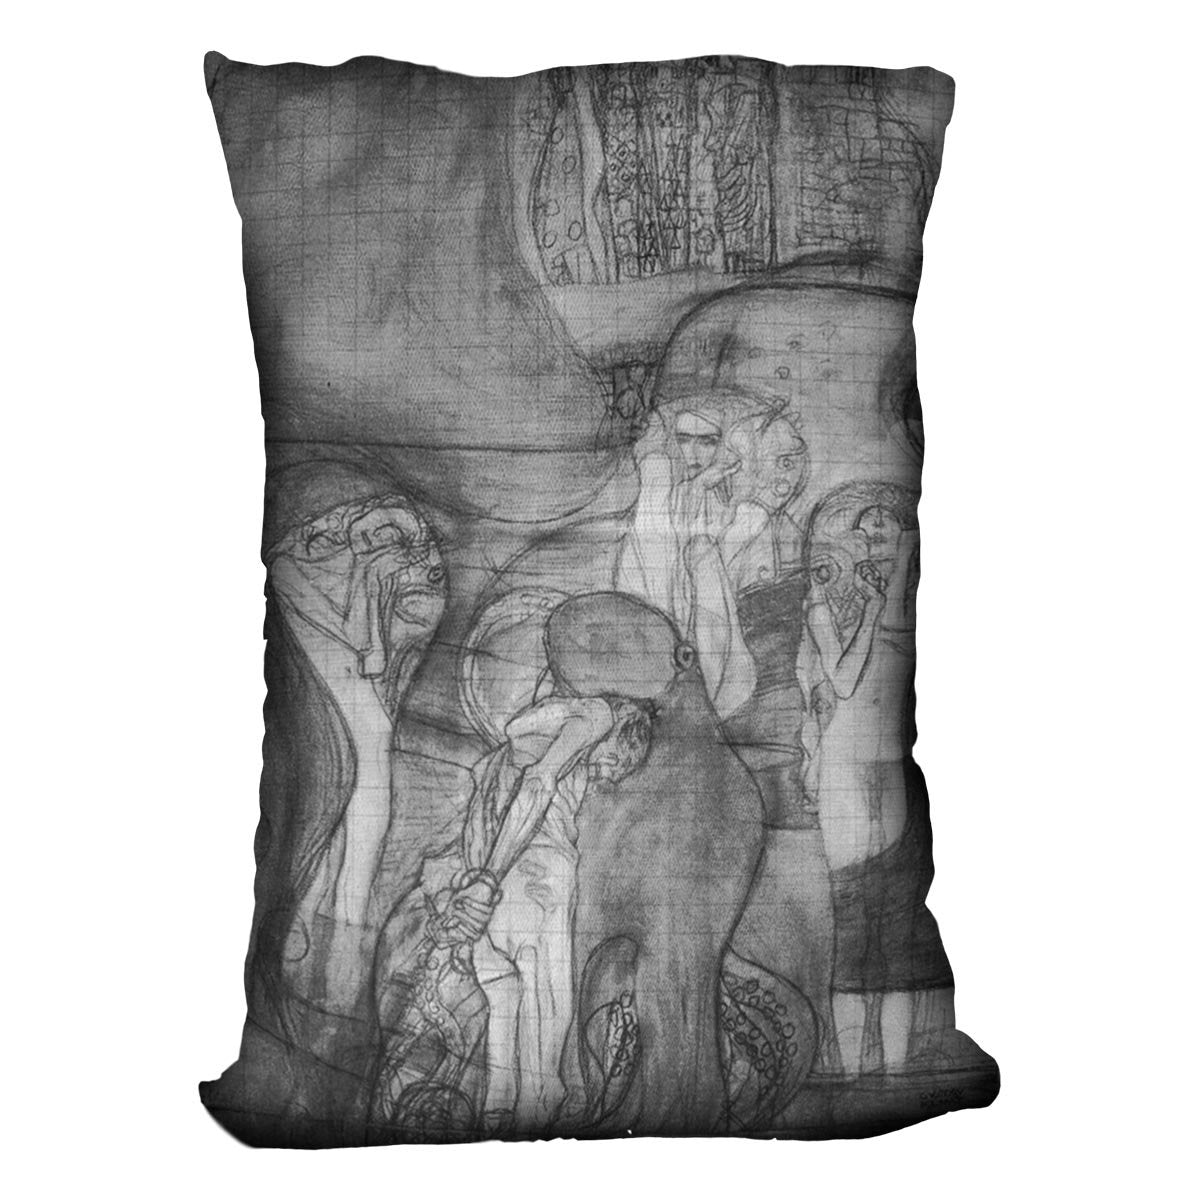 Composition draft of the law faculty image by Klimt Throw Pillow